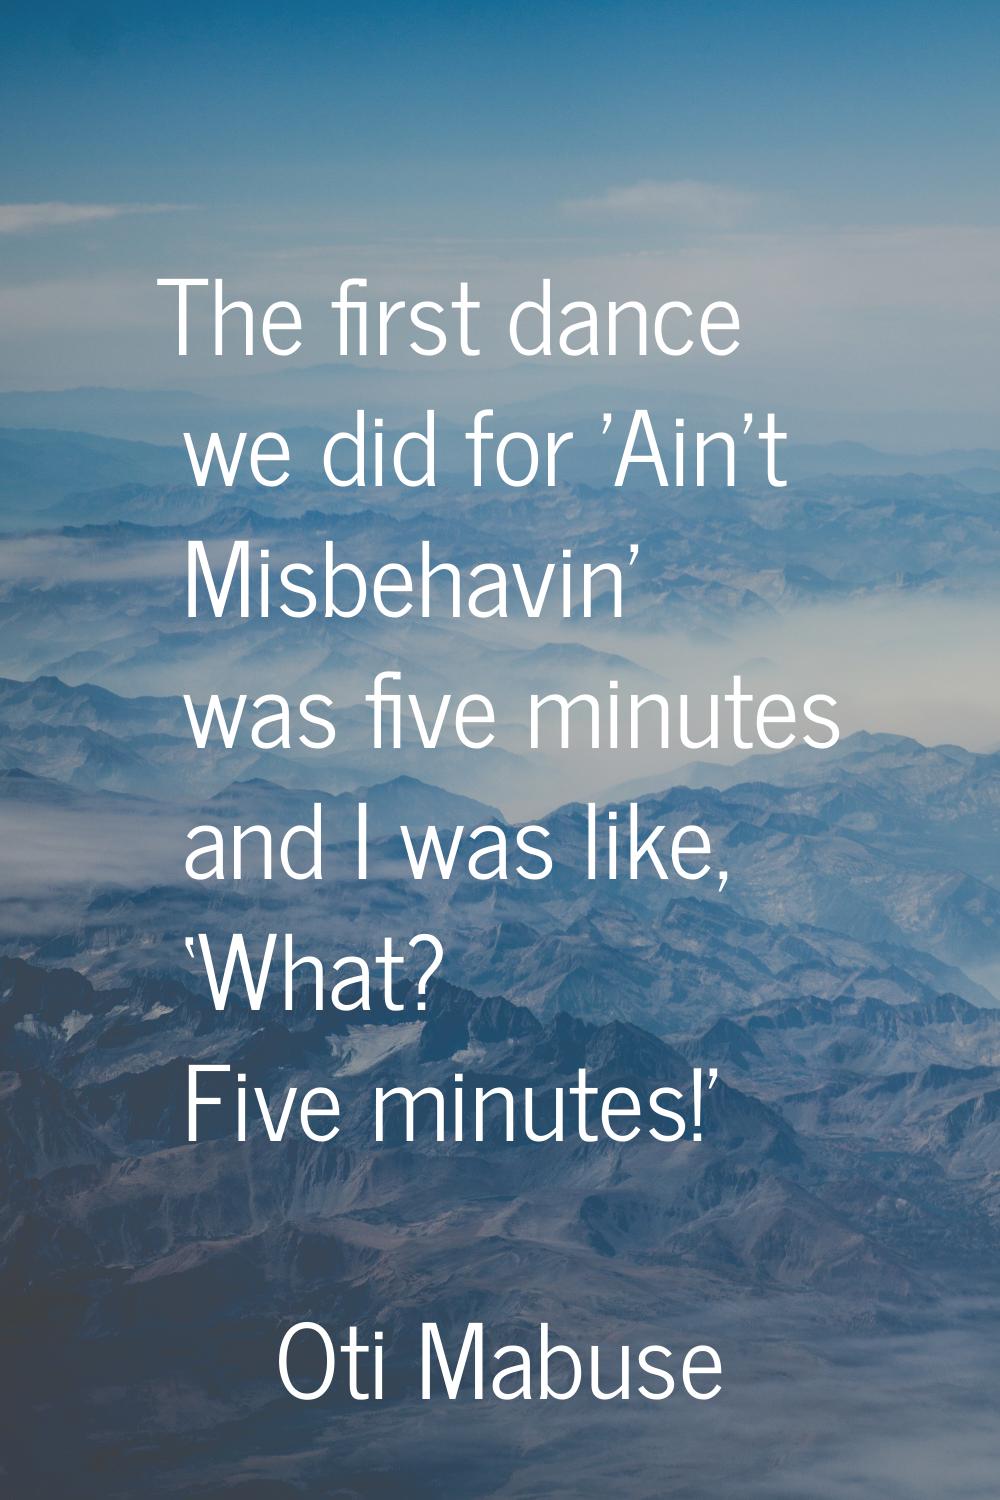 The first dance we did for 'Ain’t Misbehavin’ was five minutes and I was like, ‘What? Five minutes!